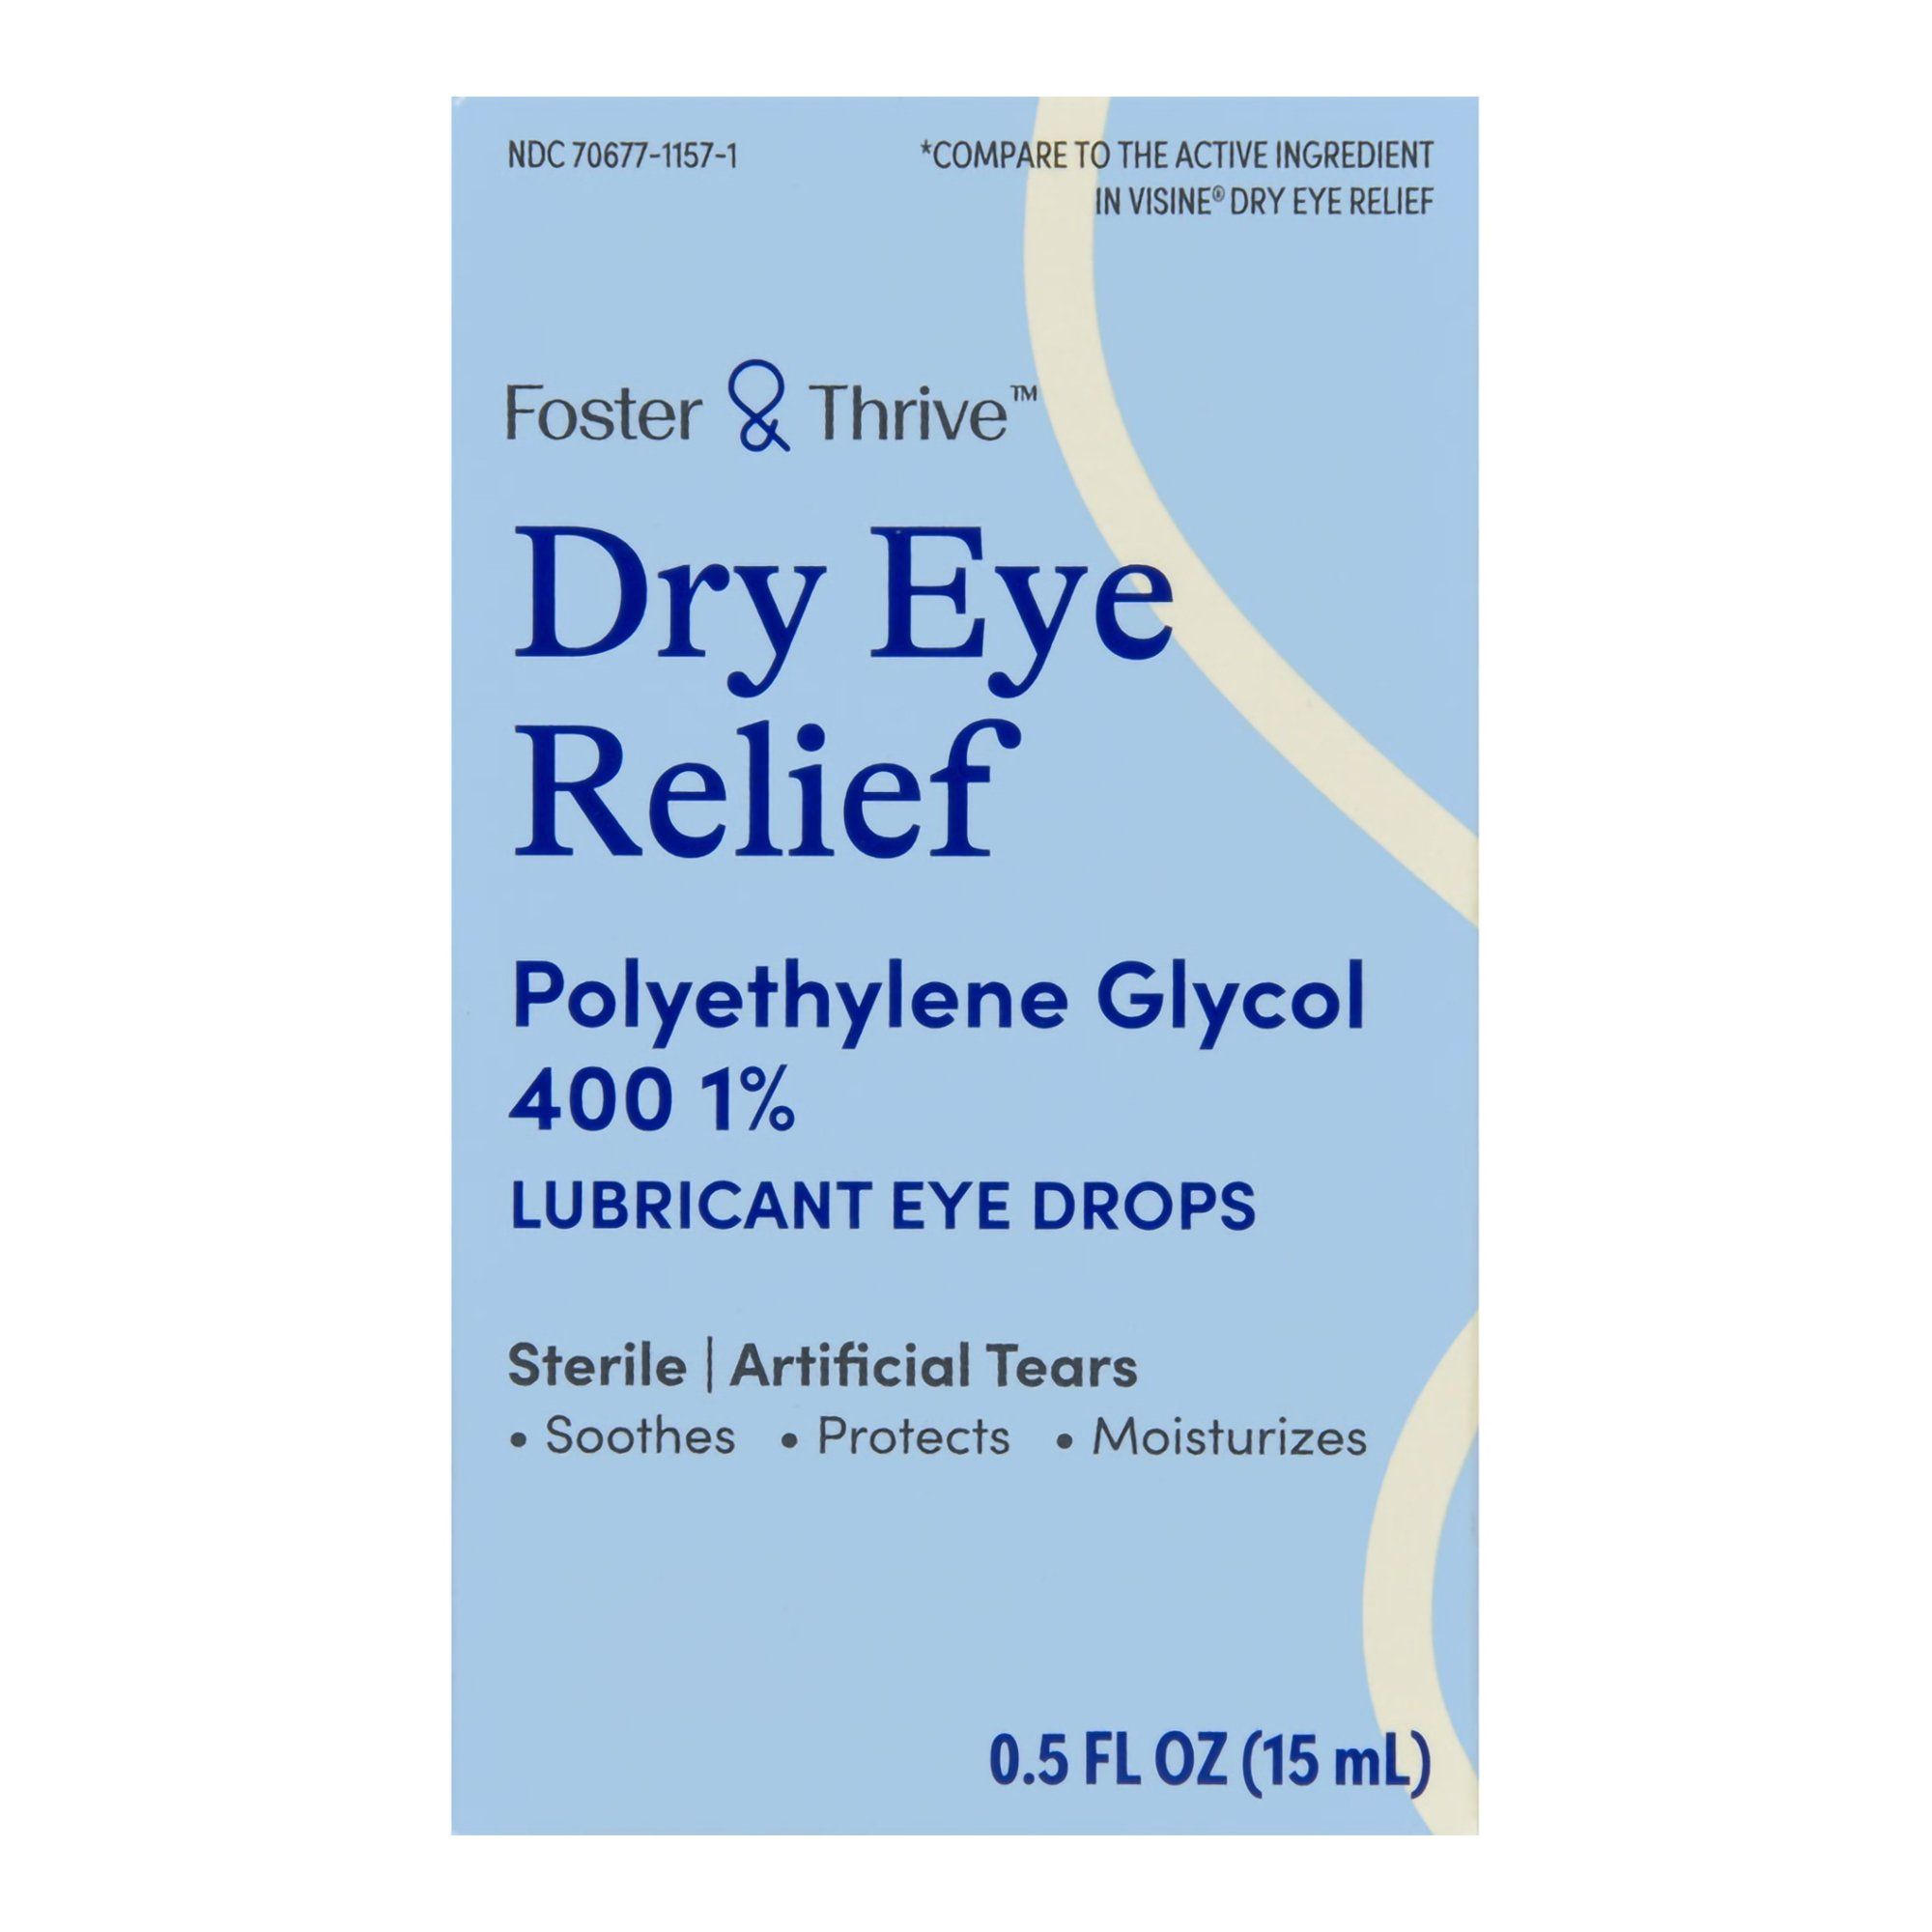 Foster & Thrive Dry Eye Relief Drops - 0.5 fl oz